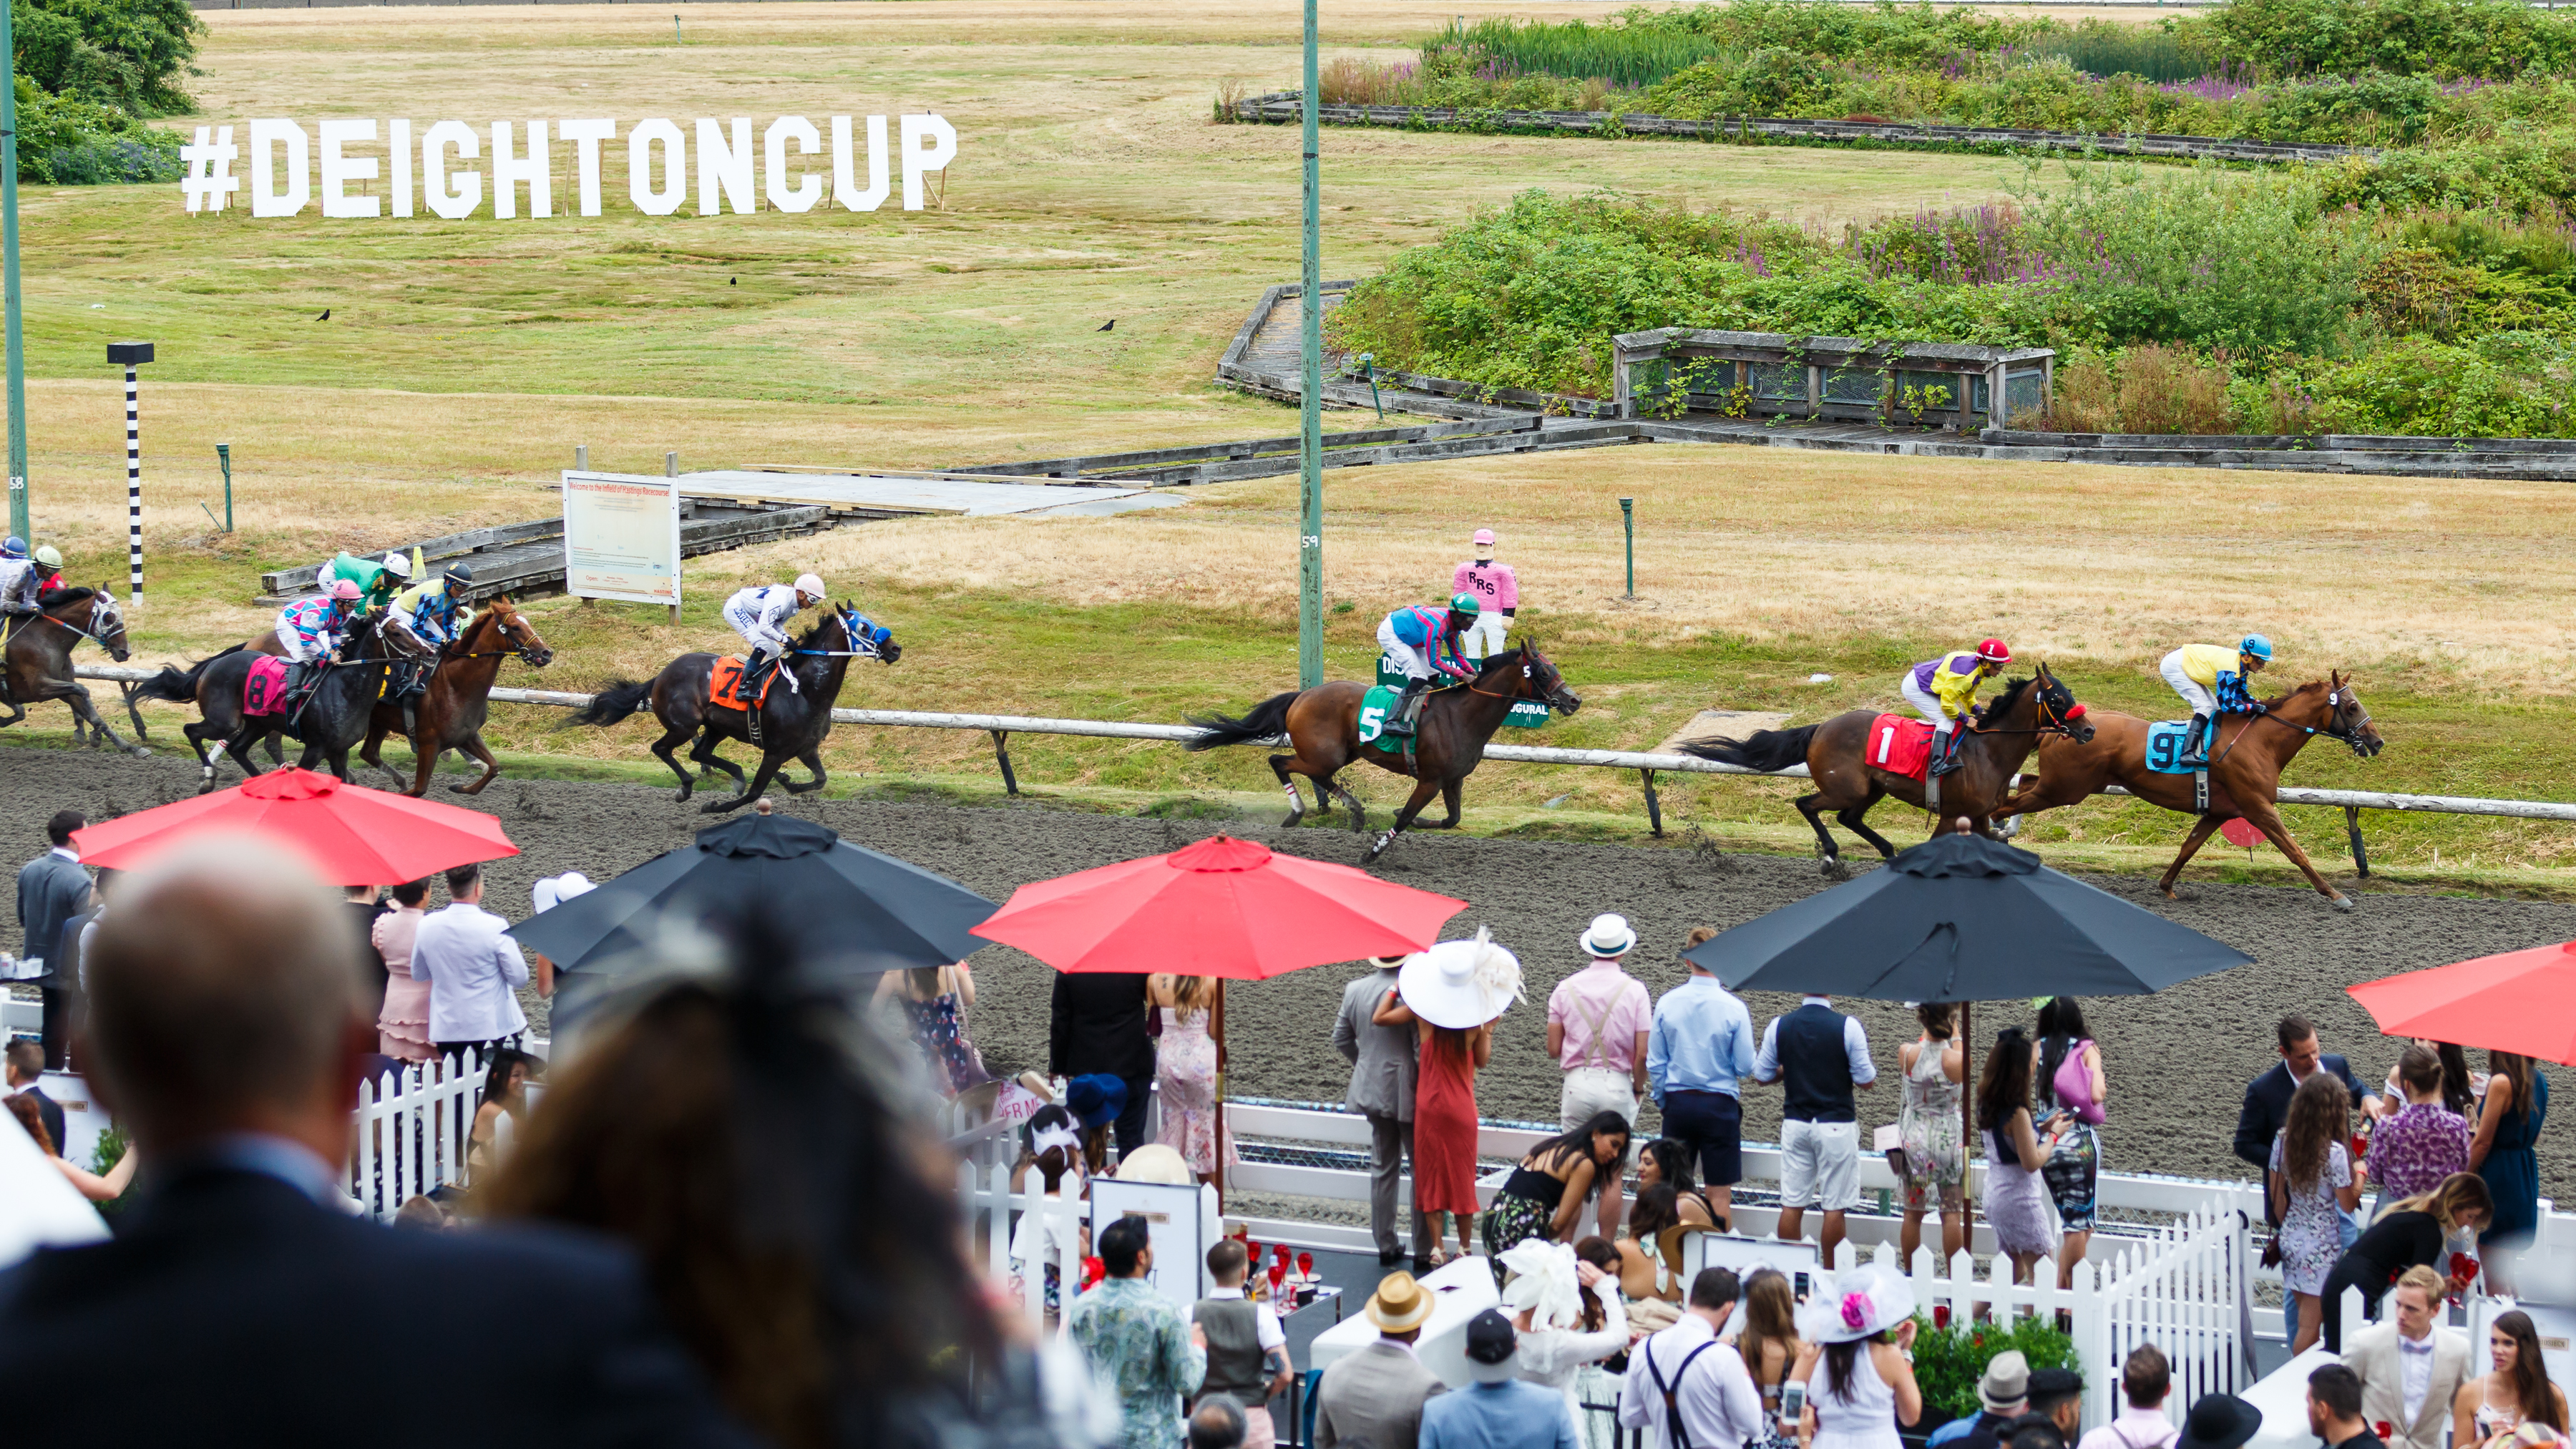 Get Fancy and Celebrate 10 Years of the Deighton Cup